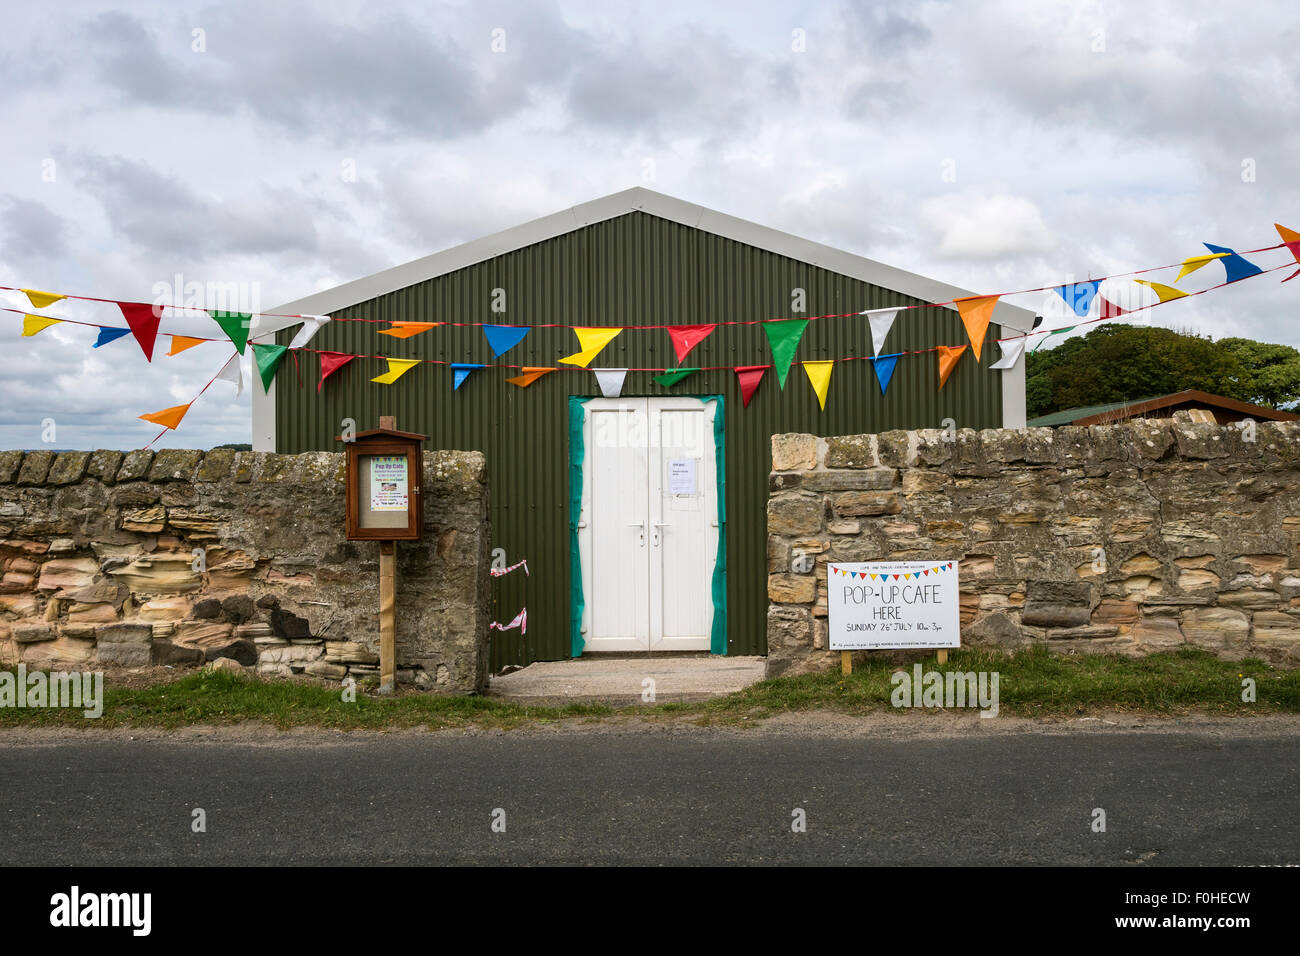 Village hall at Boulmer in Northumberland with sign advertising a pop-up cafe. Stock Photo